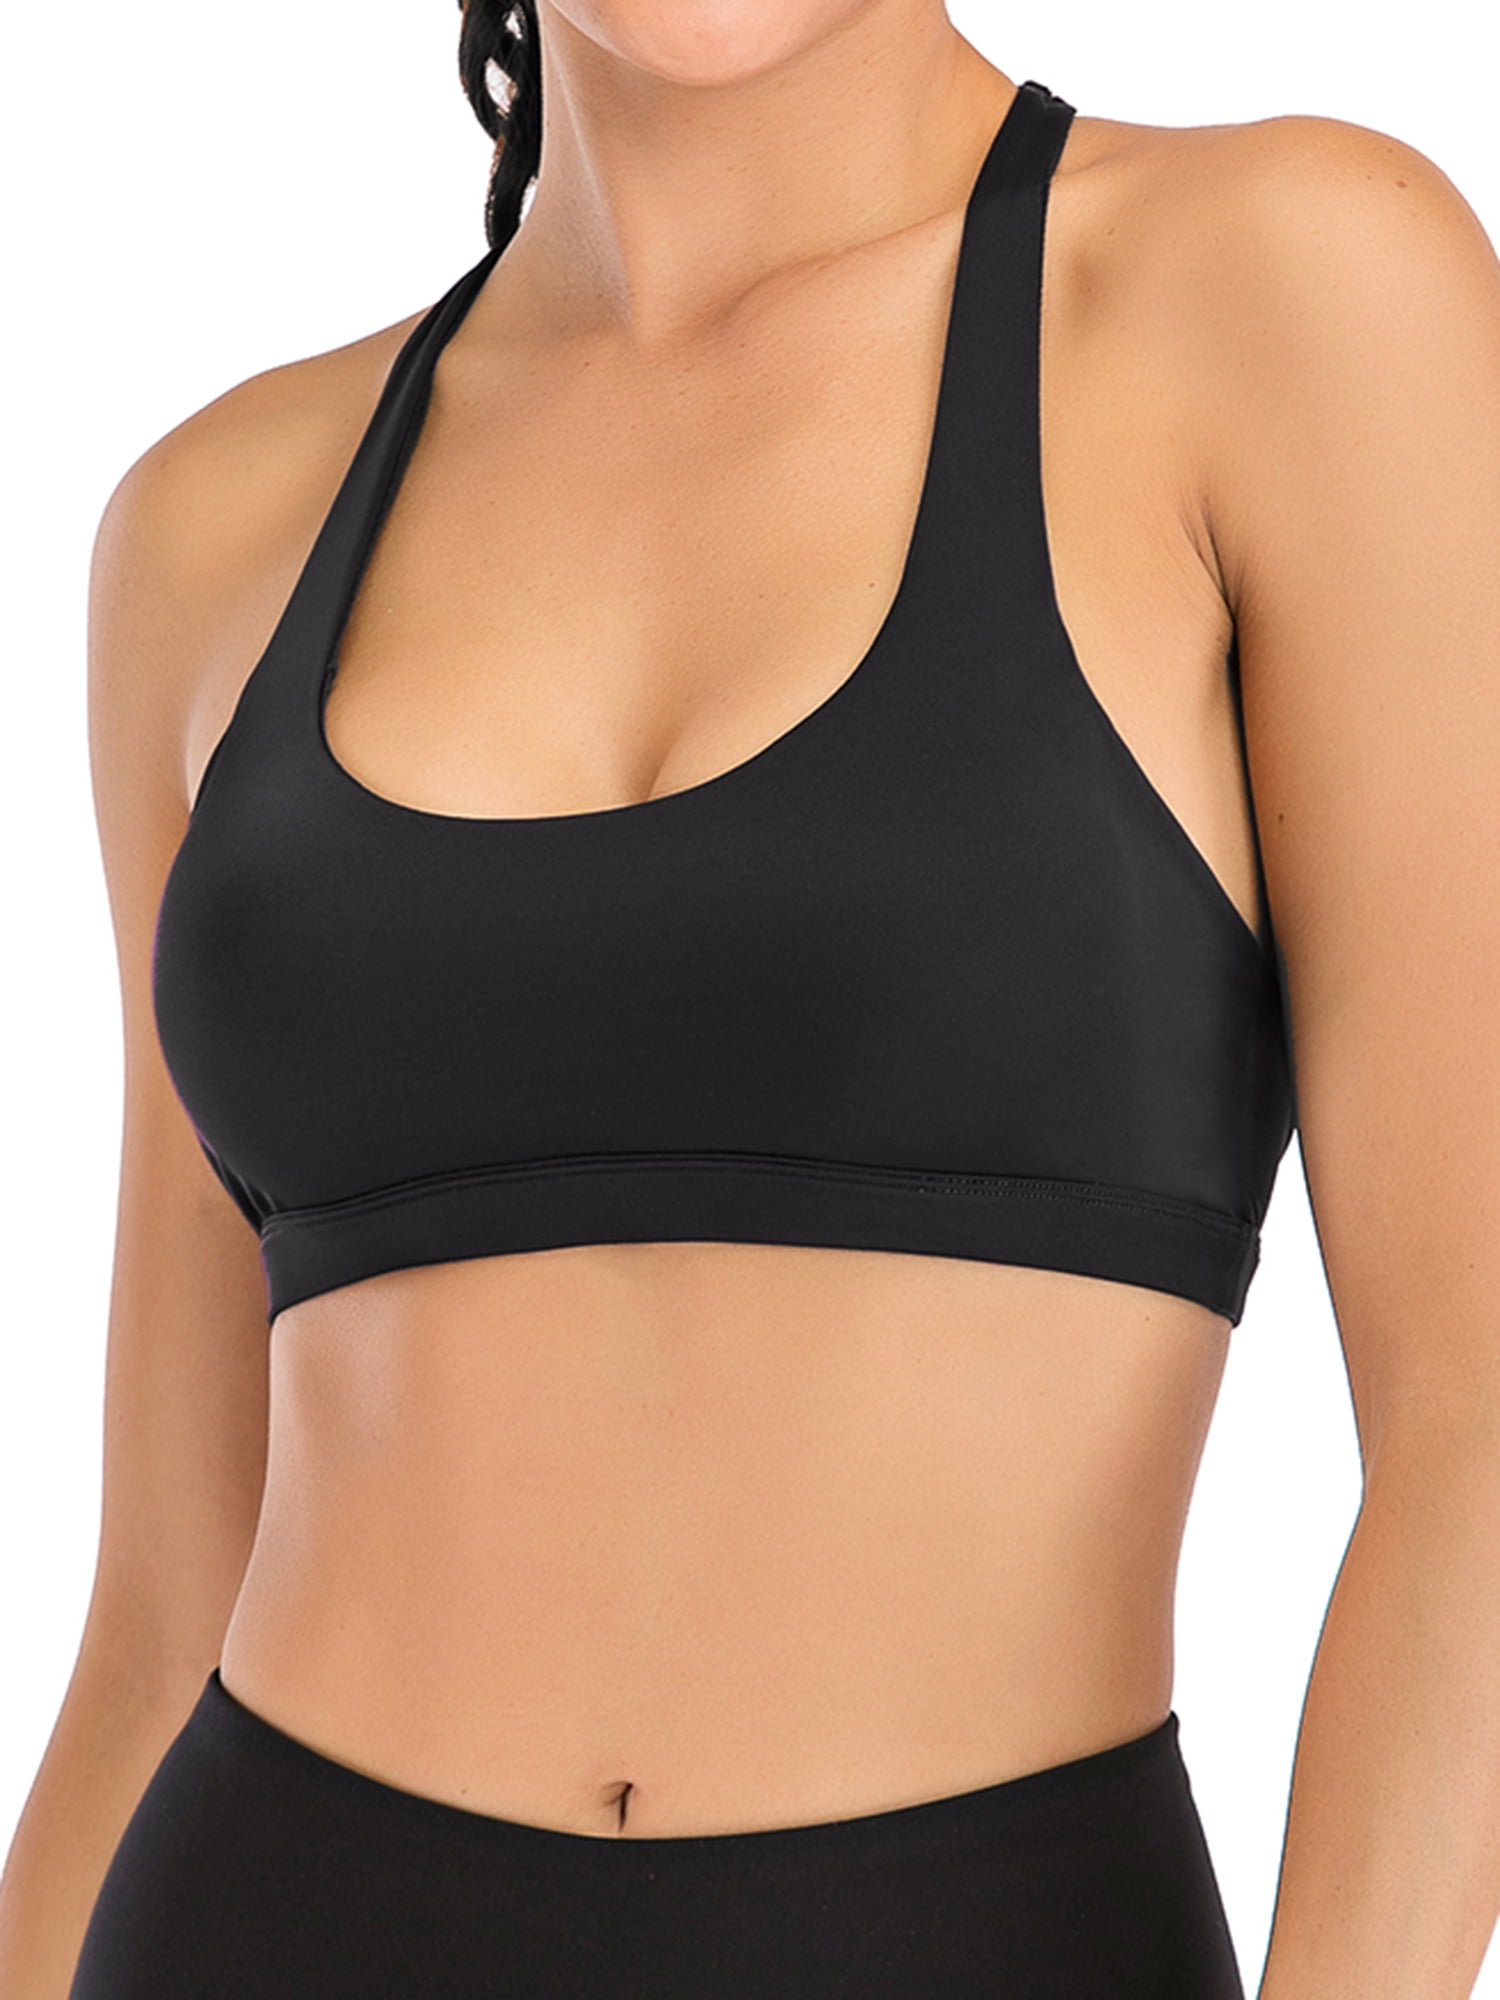 Yoga Sports Bra with Removable Pads Yvette Sports Bra for Women 